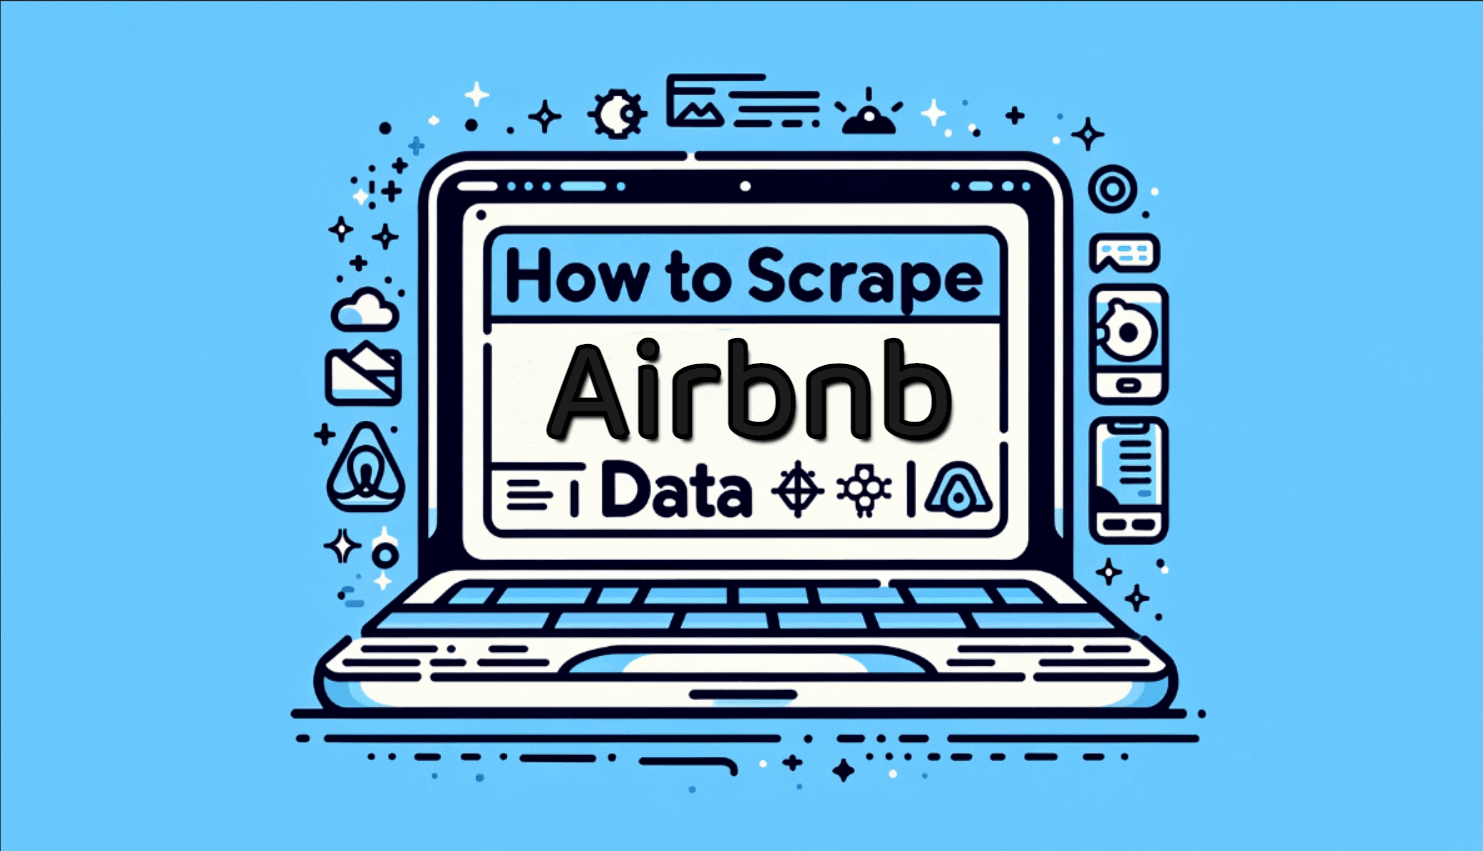 How to Scrape Airbnb Data